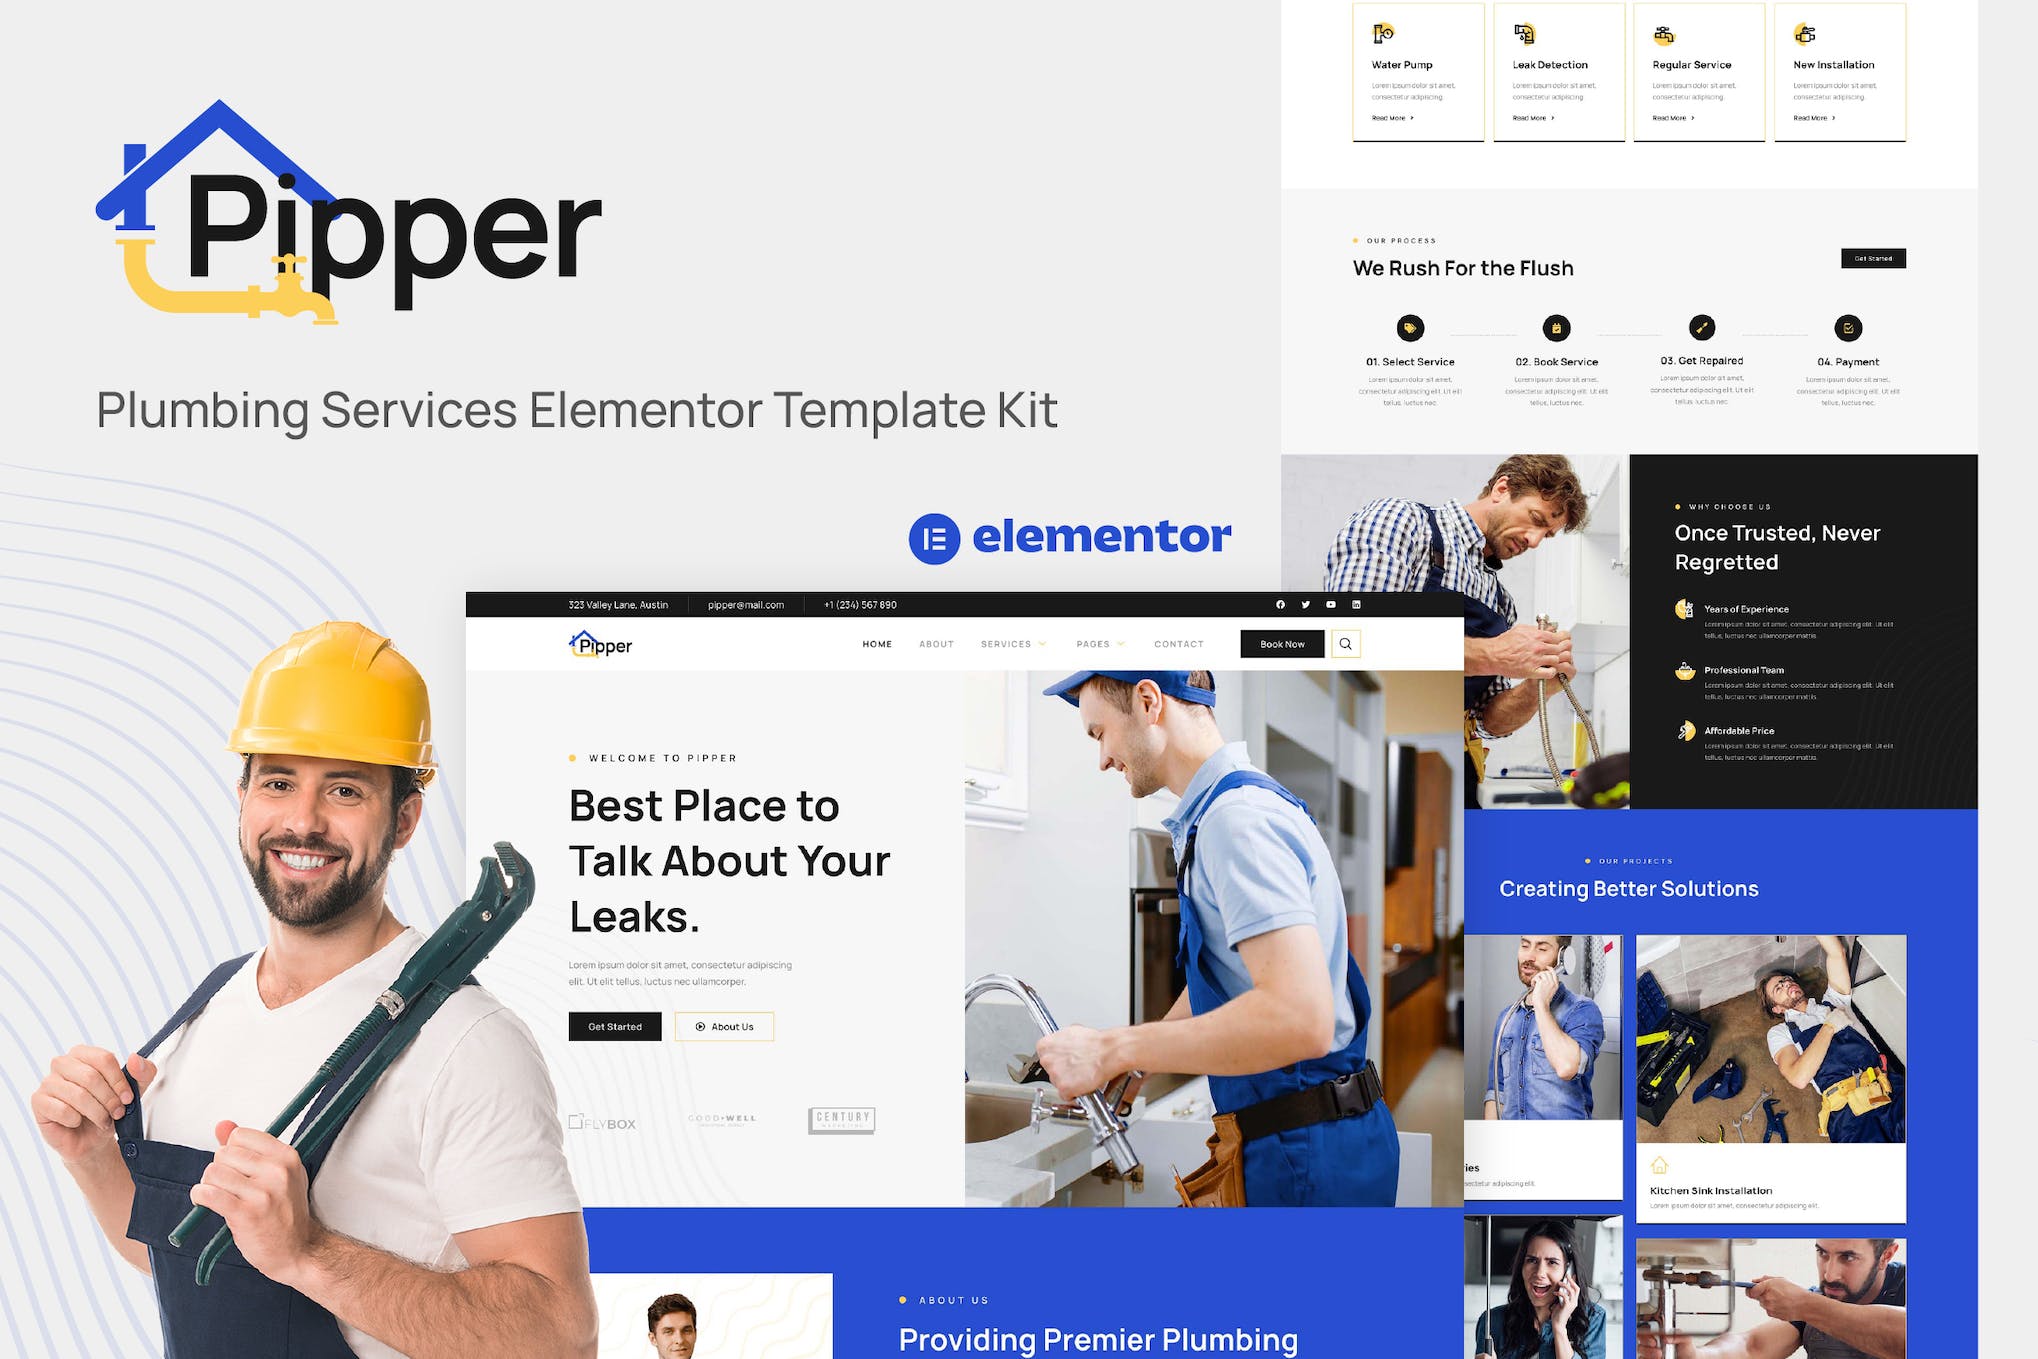 Pipper - Plumbing Services Elementor Template Kit